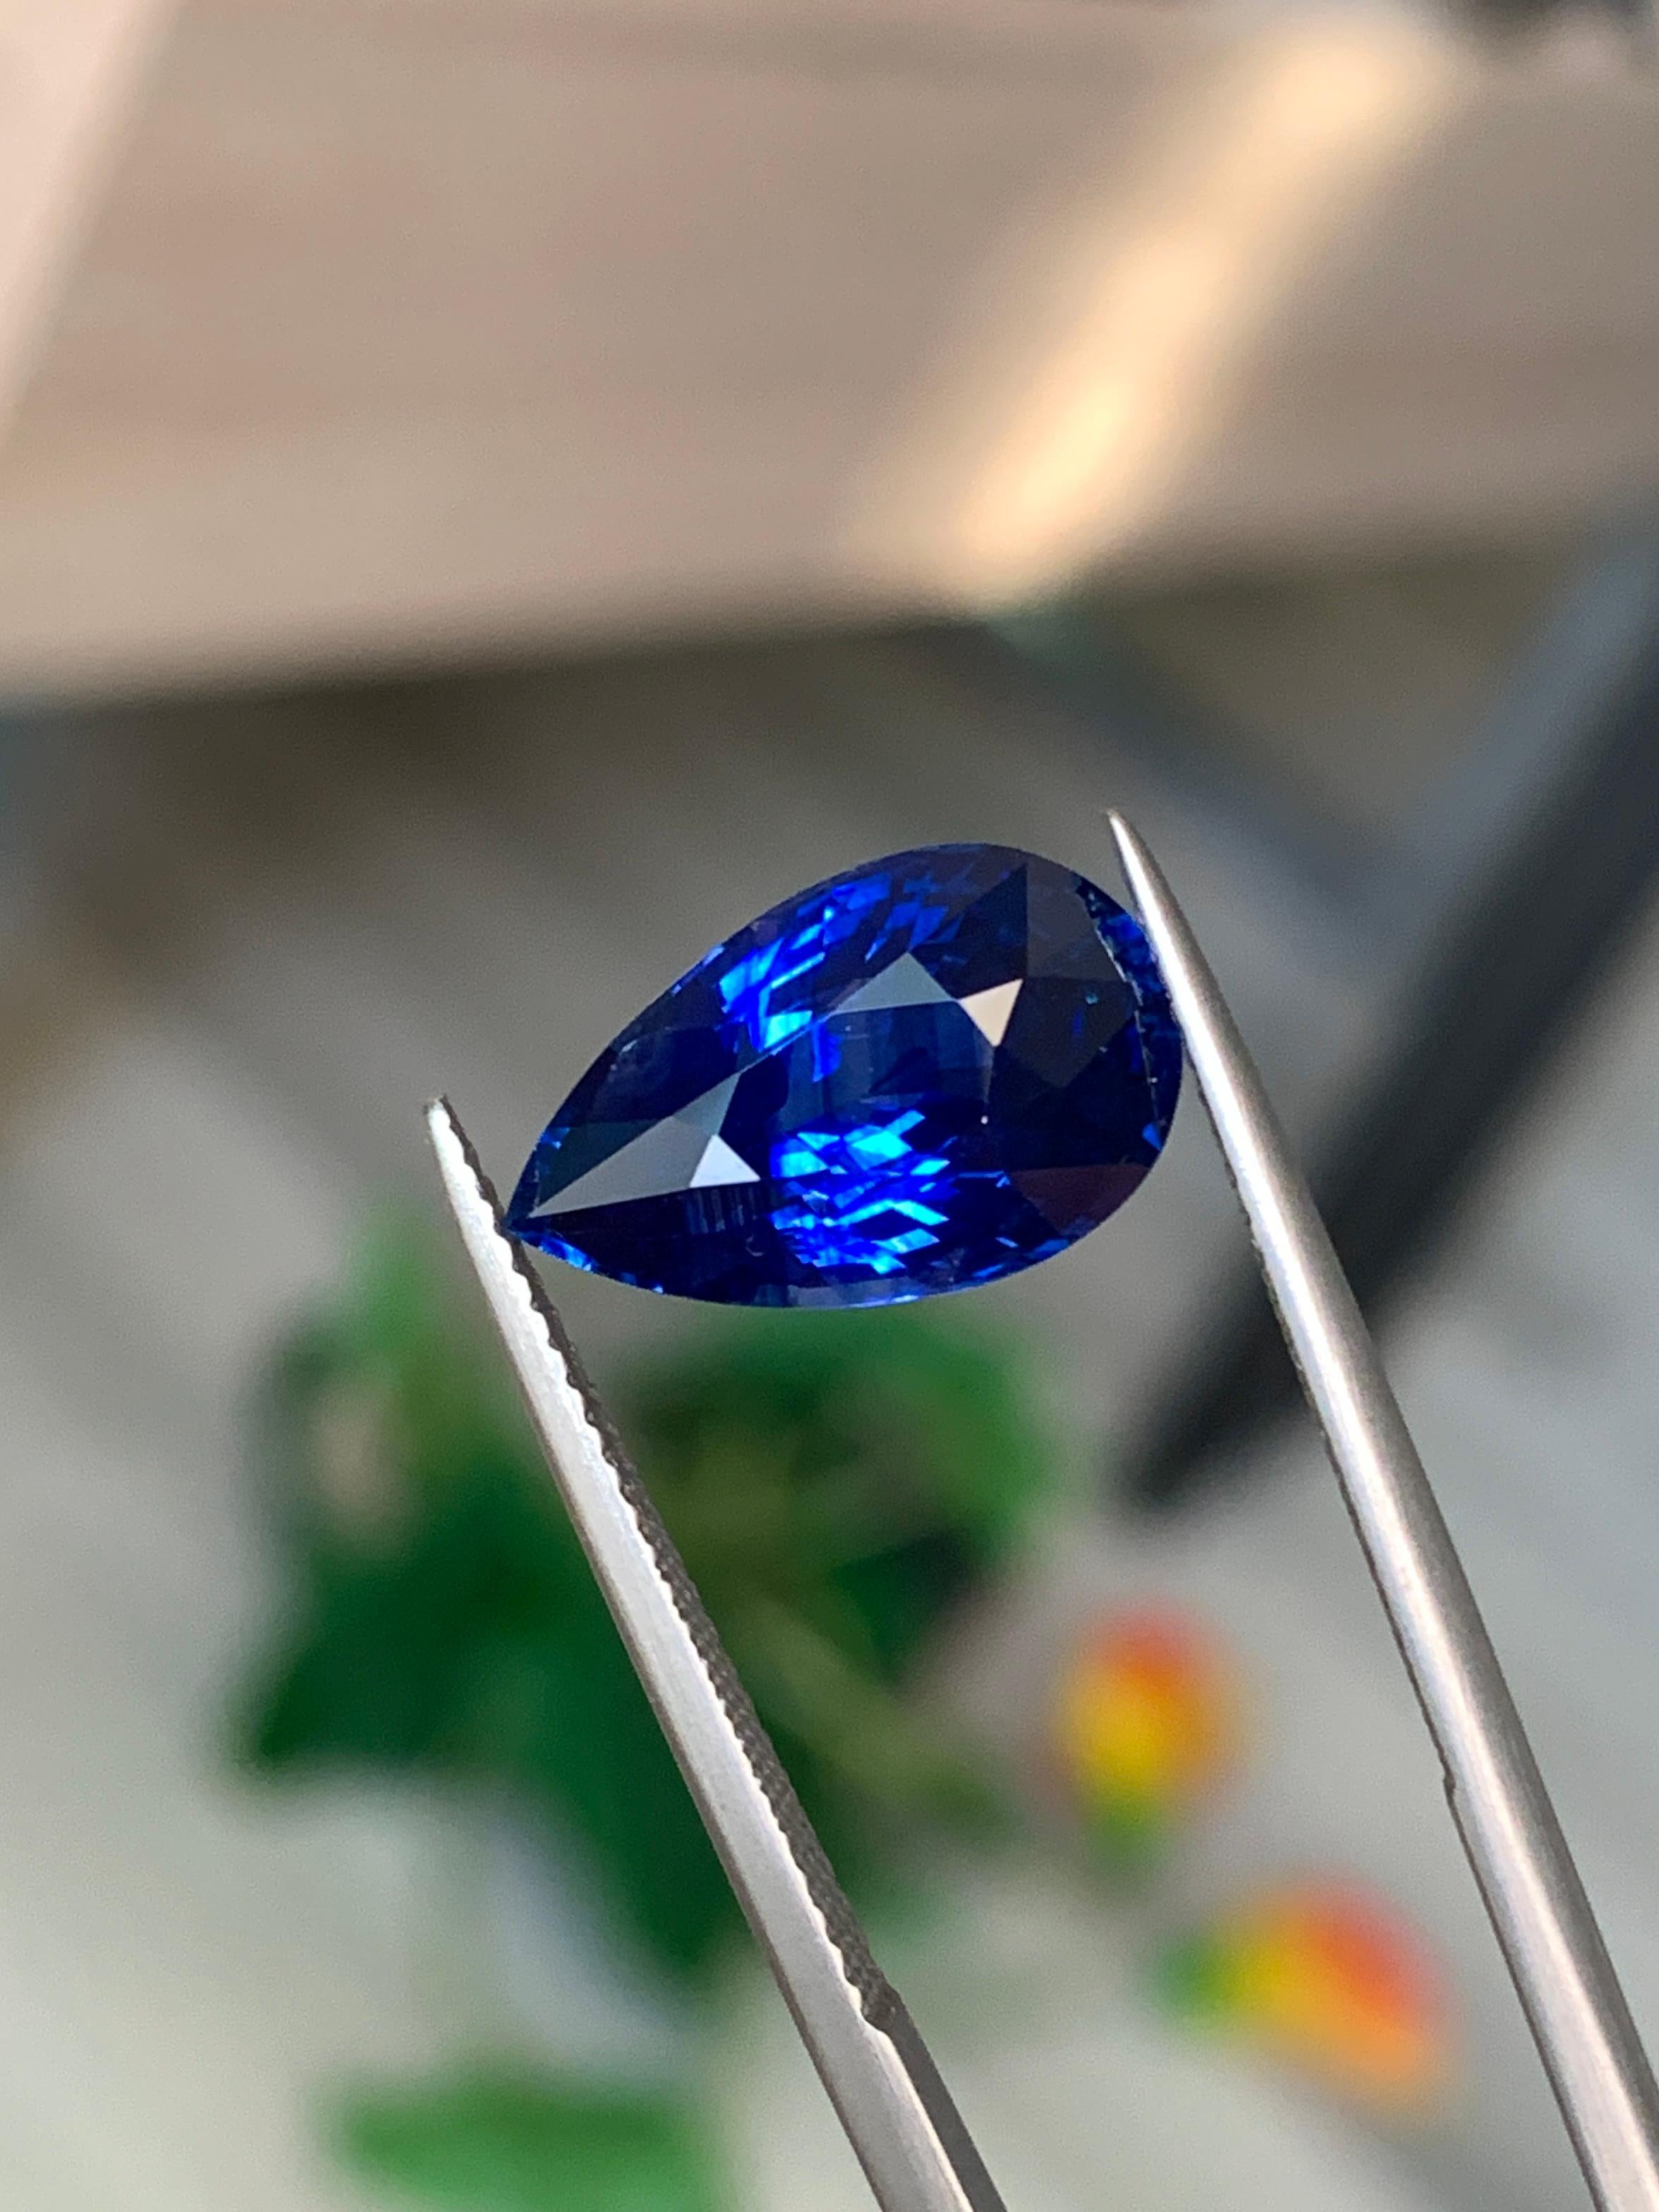 ITEM DESCRIPTION: 
Gem type : Natural Sapphire
Origin: Sri Lanka
Treatment: Heated
Color: Royal Blue
shape: Pear
Size:  6.10 Carats


Royal blue sapphires from Sri Lanka, also known as Ceylon sapphires, are esteemed for their deep, rich blue color